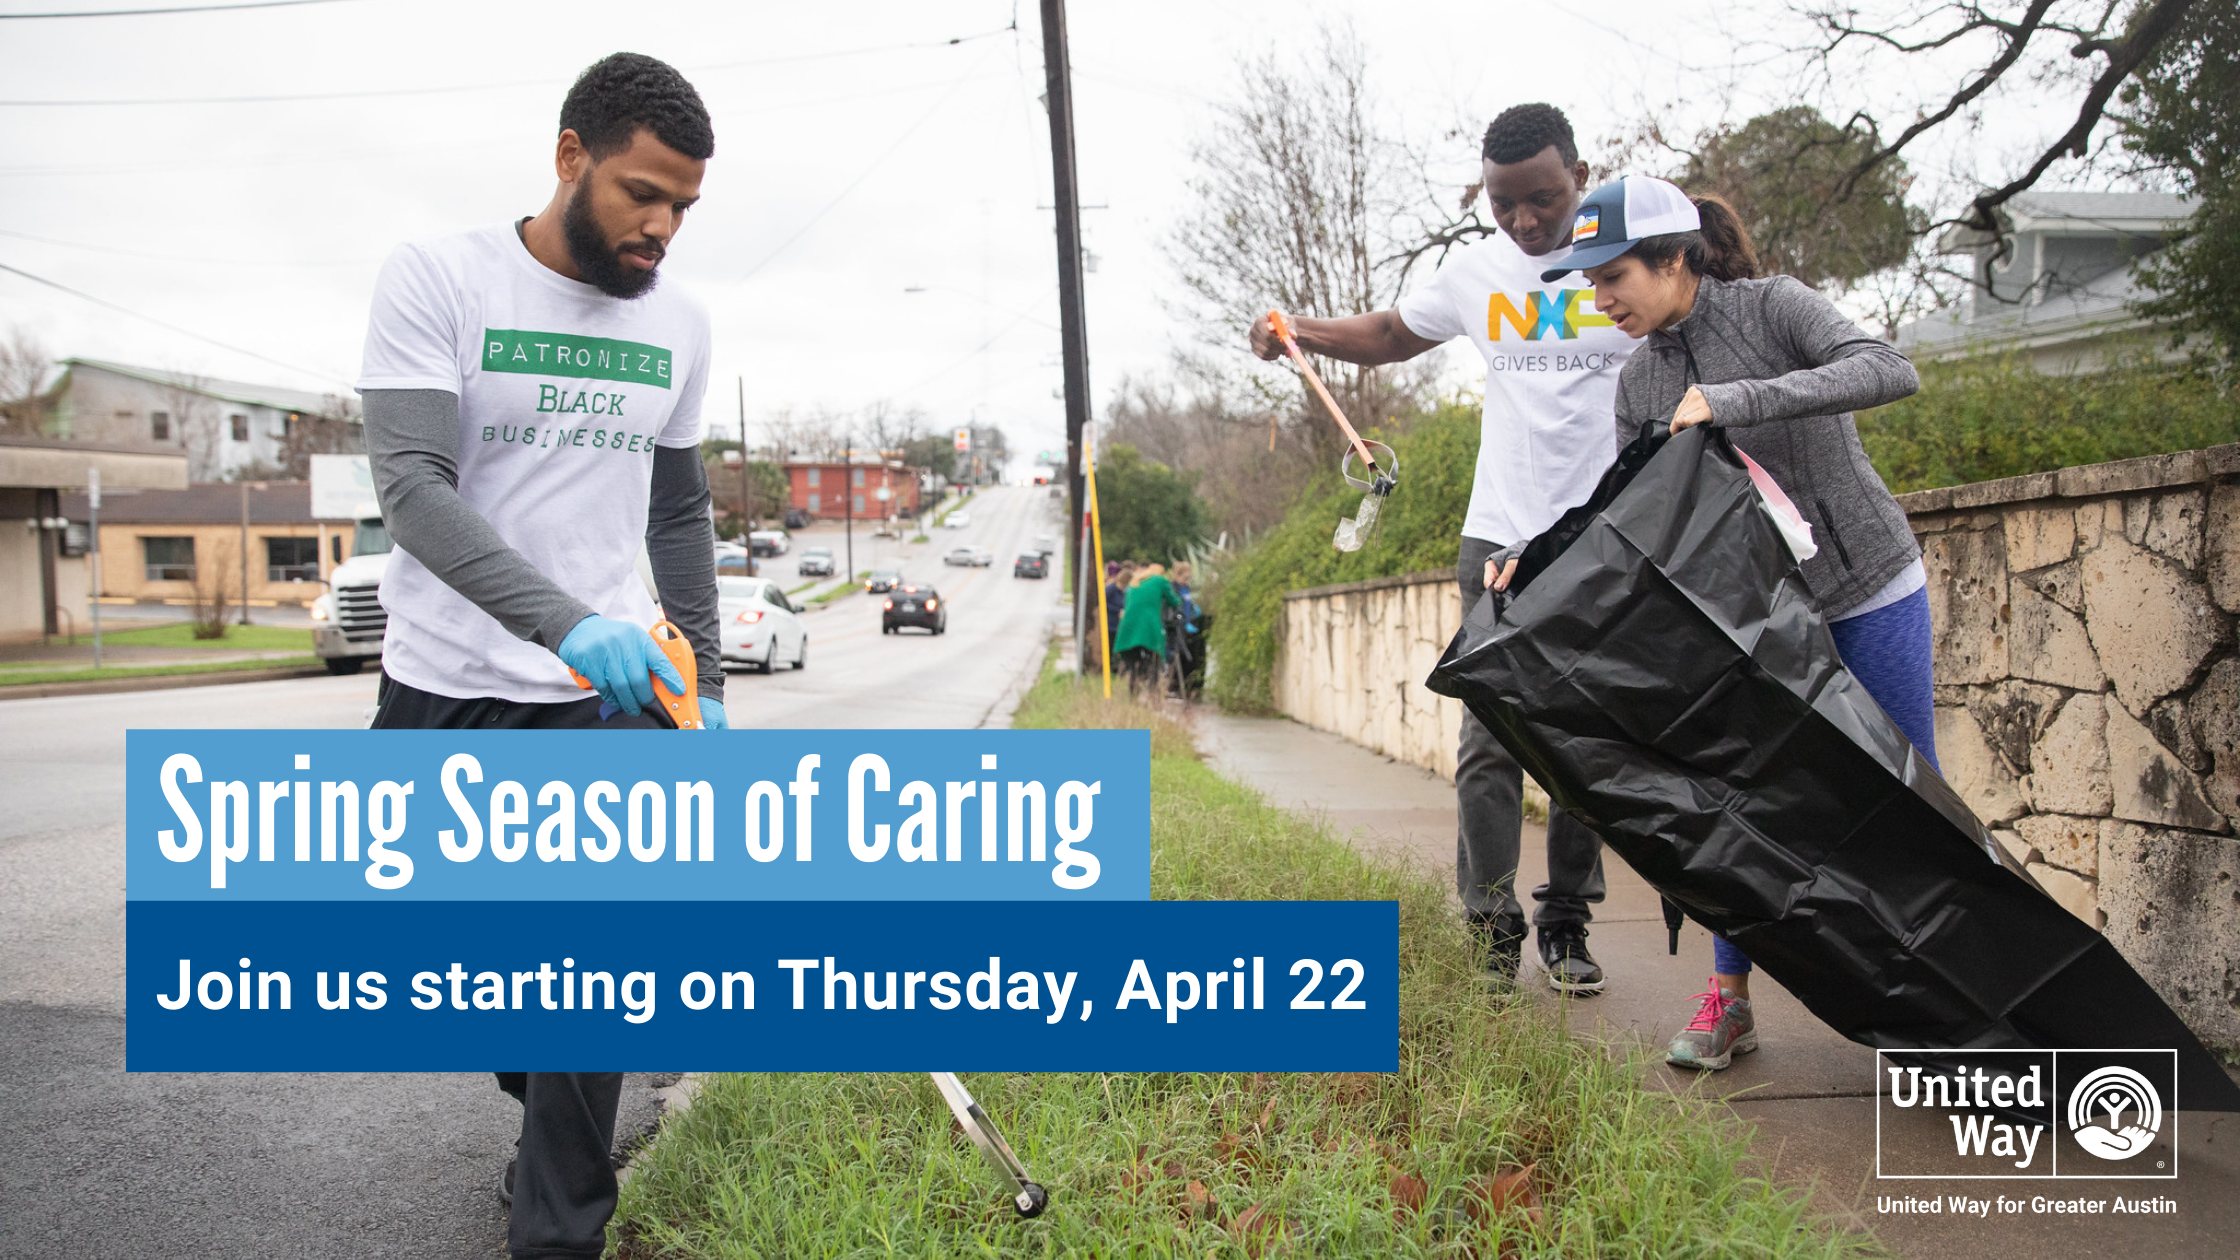 Join us for Spring Season of Caring